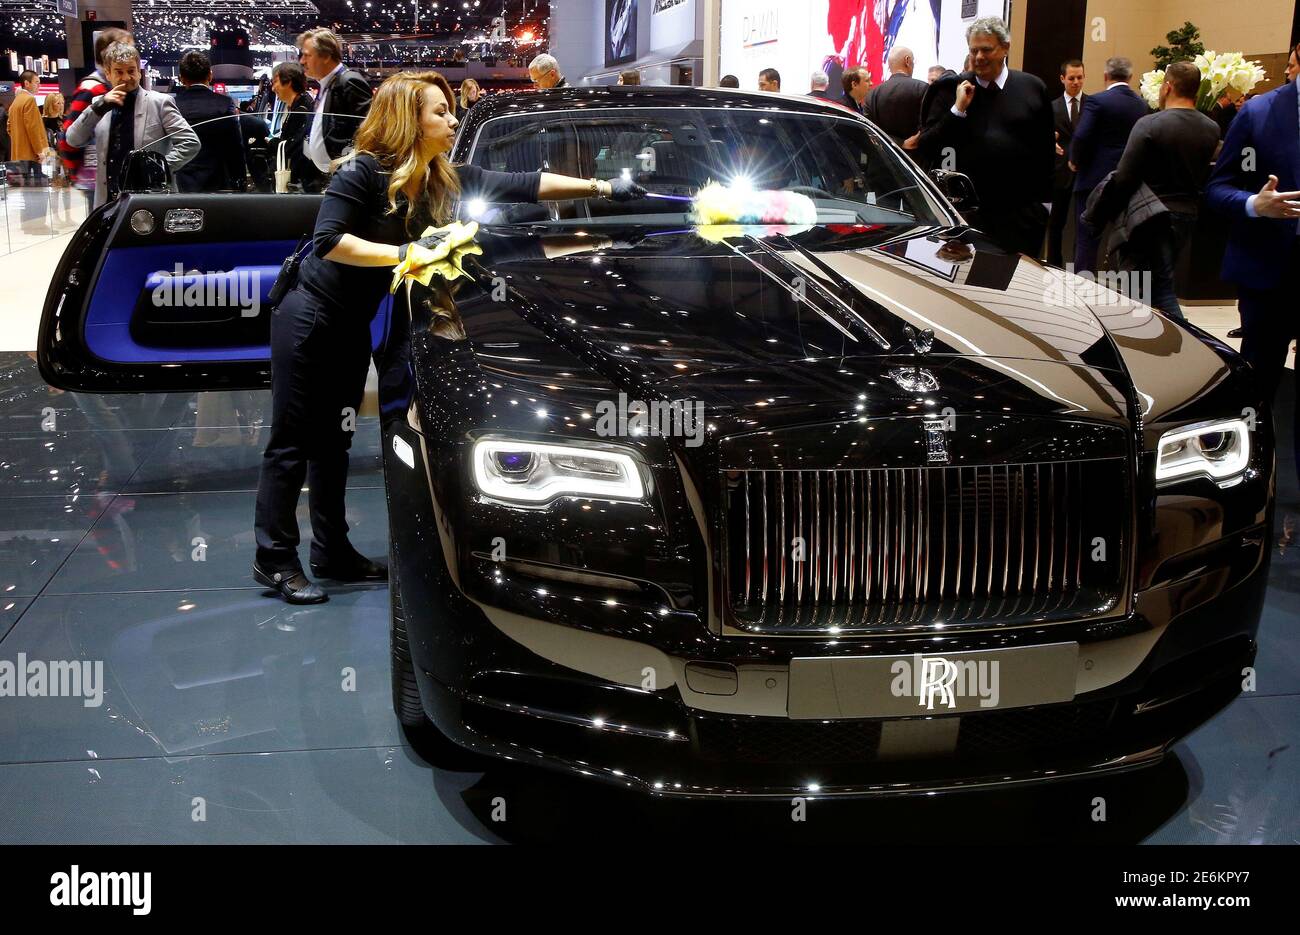 A Rolls-Royce Wraith Black Badge car is seen during the 87th International  Motor Show at Palexpo in Geneva, Switzerland March 8, 2017. REUTERS/Arnd  Wiegmann Stock Photo - Alamy